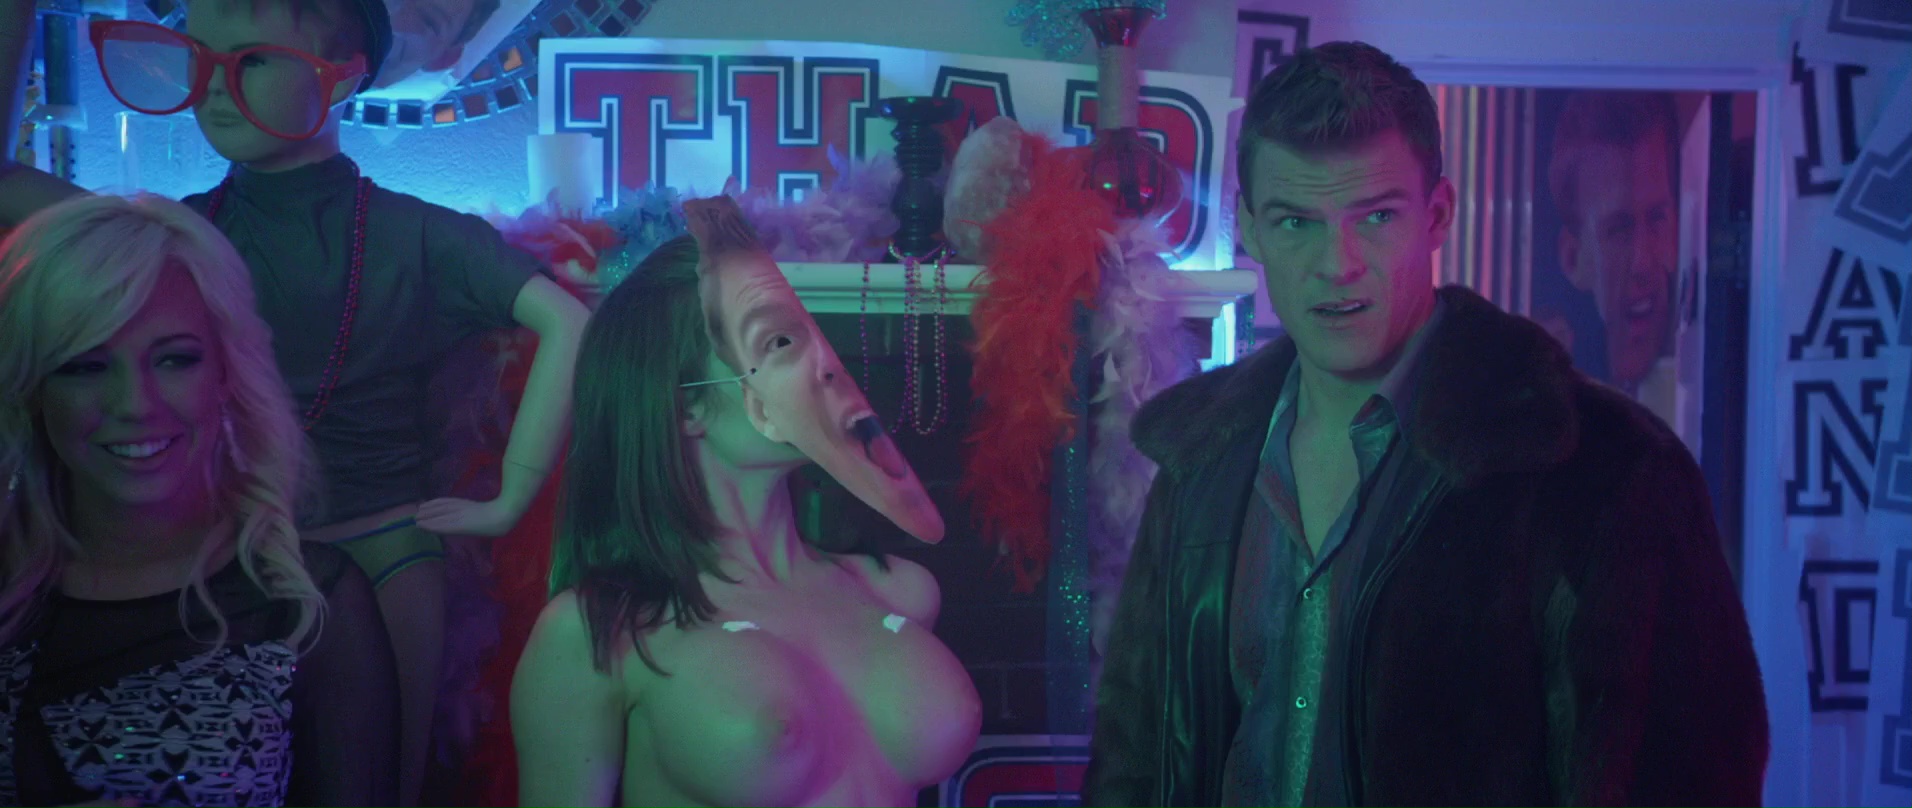 Blue Mountain State: The Rise of Thadland nude pics.